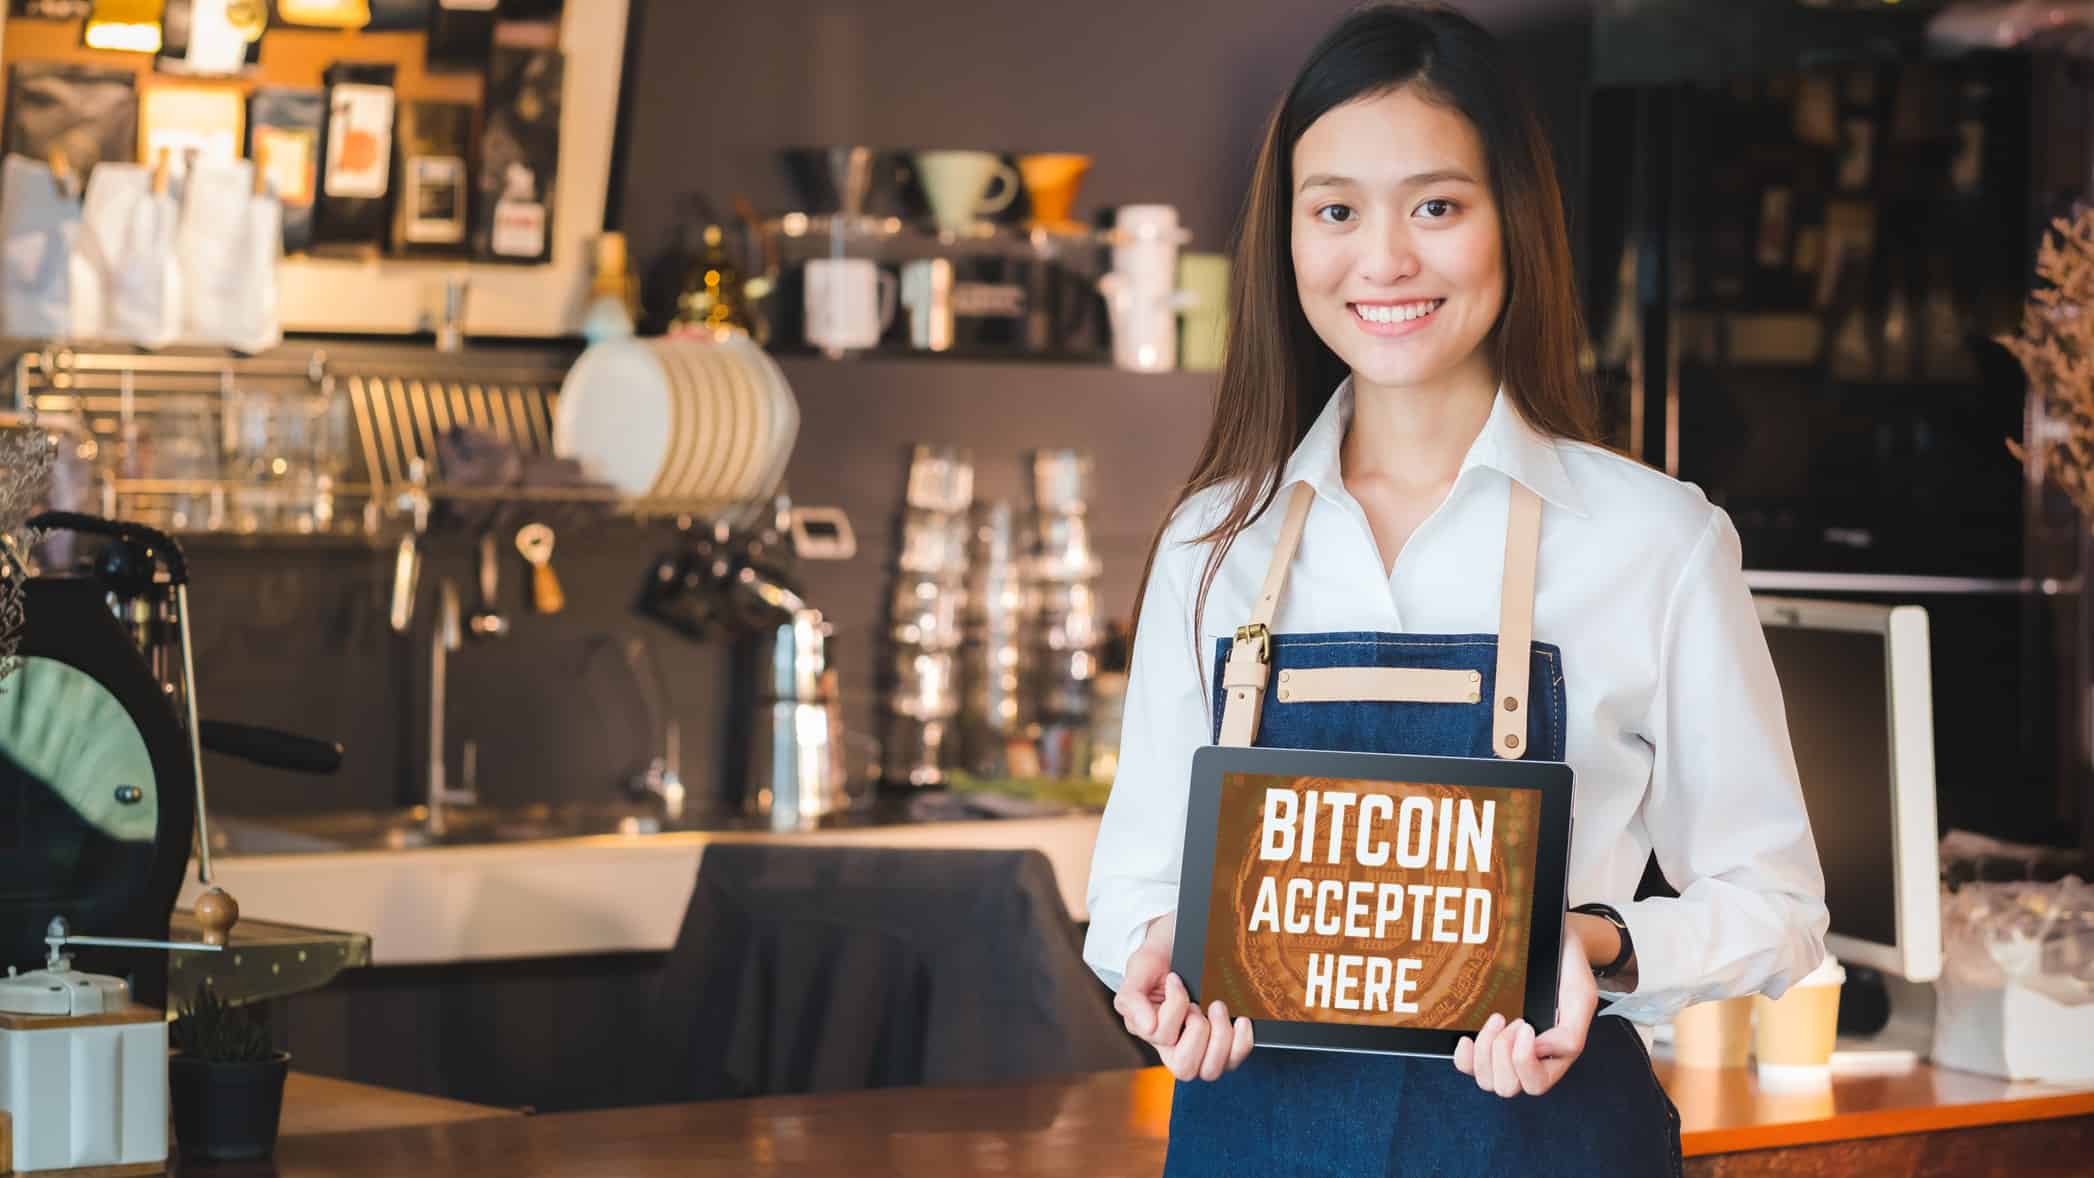 a smiling female cafe worker wearing an apron stands in front of an elaborate coffee machine and cafe set up with glasses and cups on shelves as she holds a sign that says 'Bitcoin Accepted Here' .